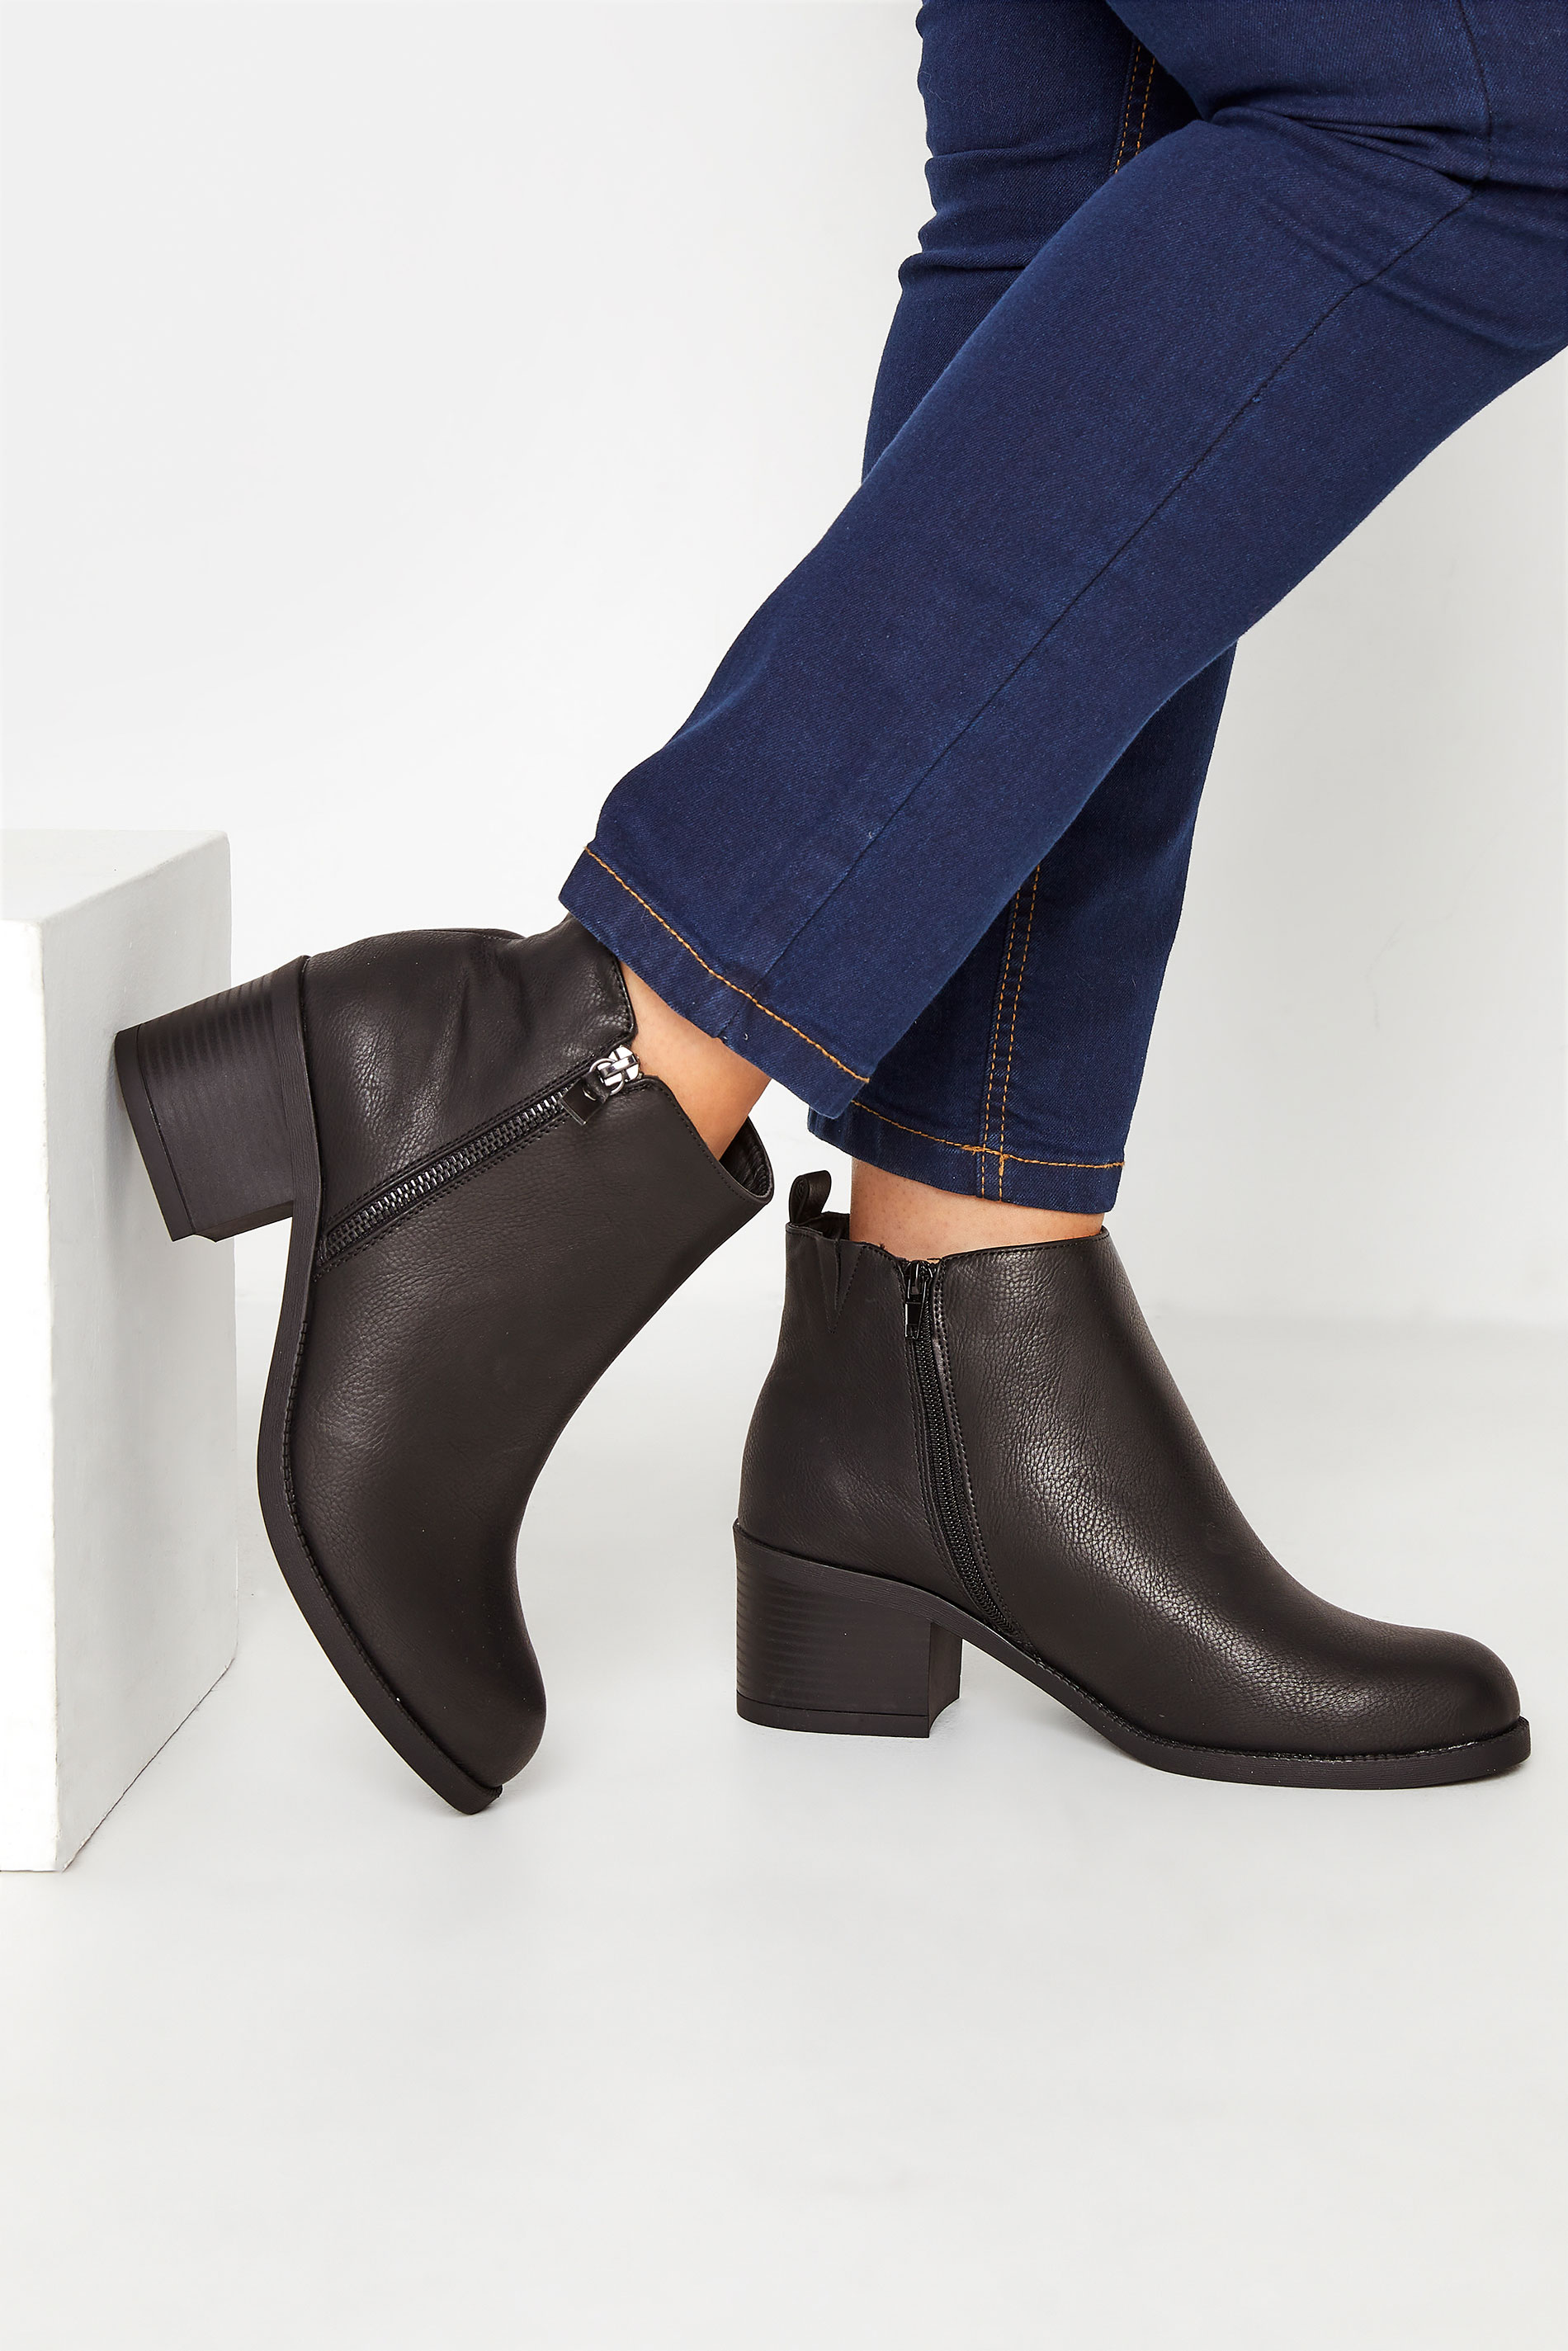 Black Side Zip Block Heel Boots In Wide E Fit & Extra Wide EEE Fit | Yours Clothing 1